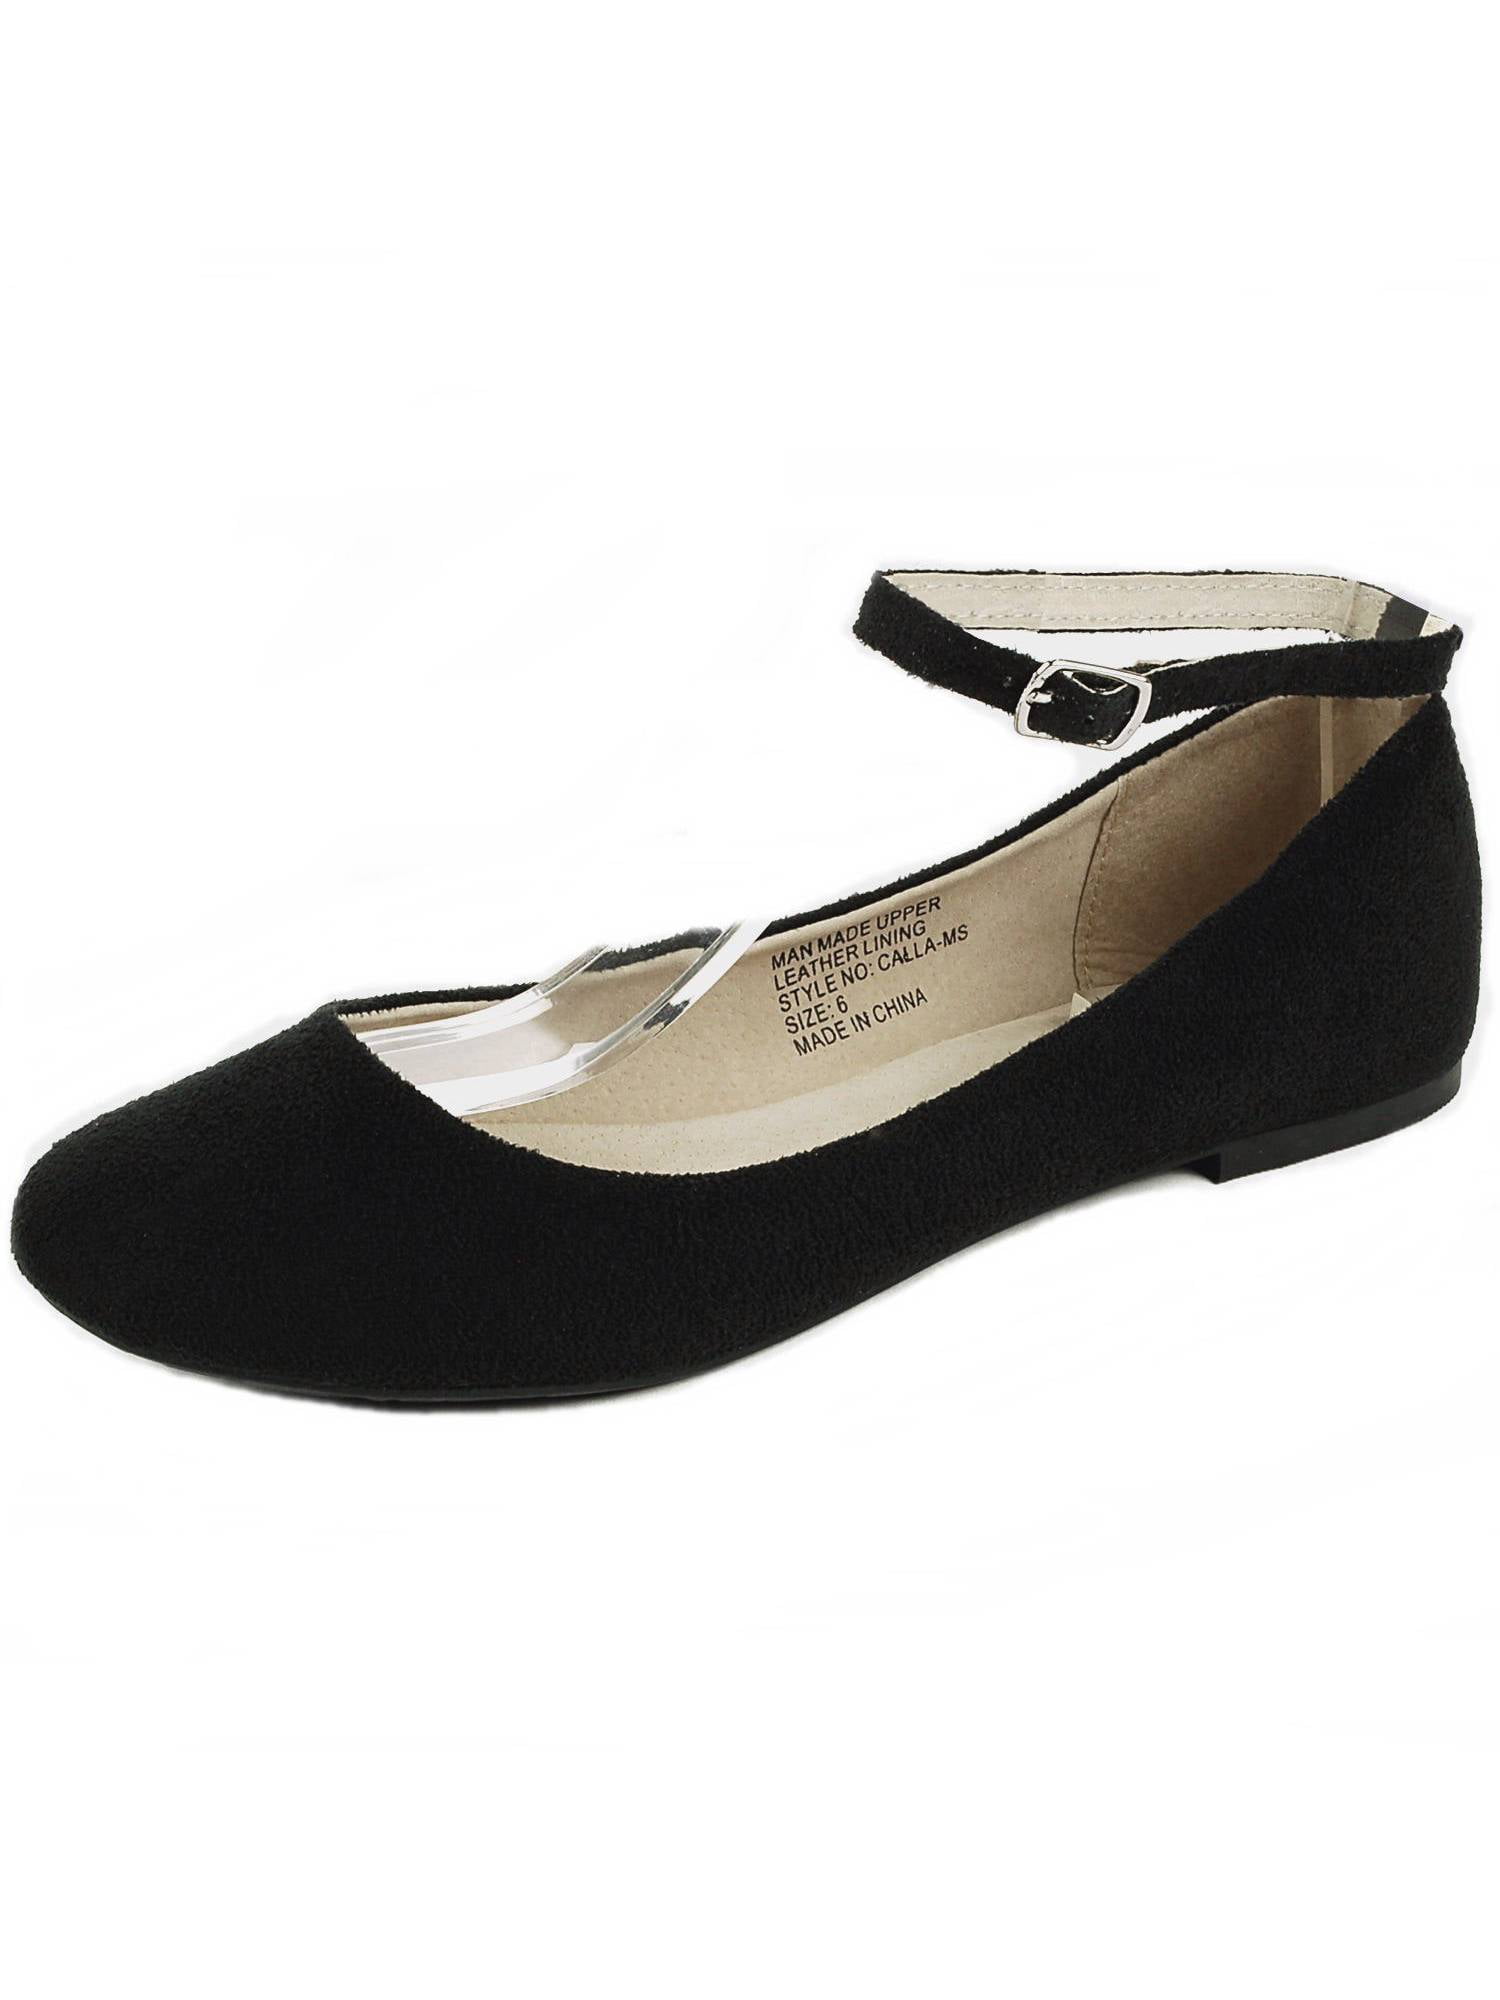 ballet pumps with ankle strap